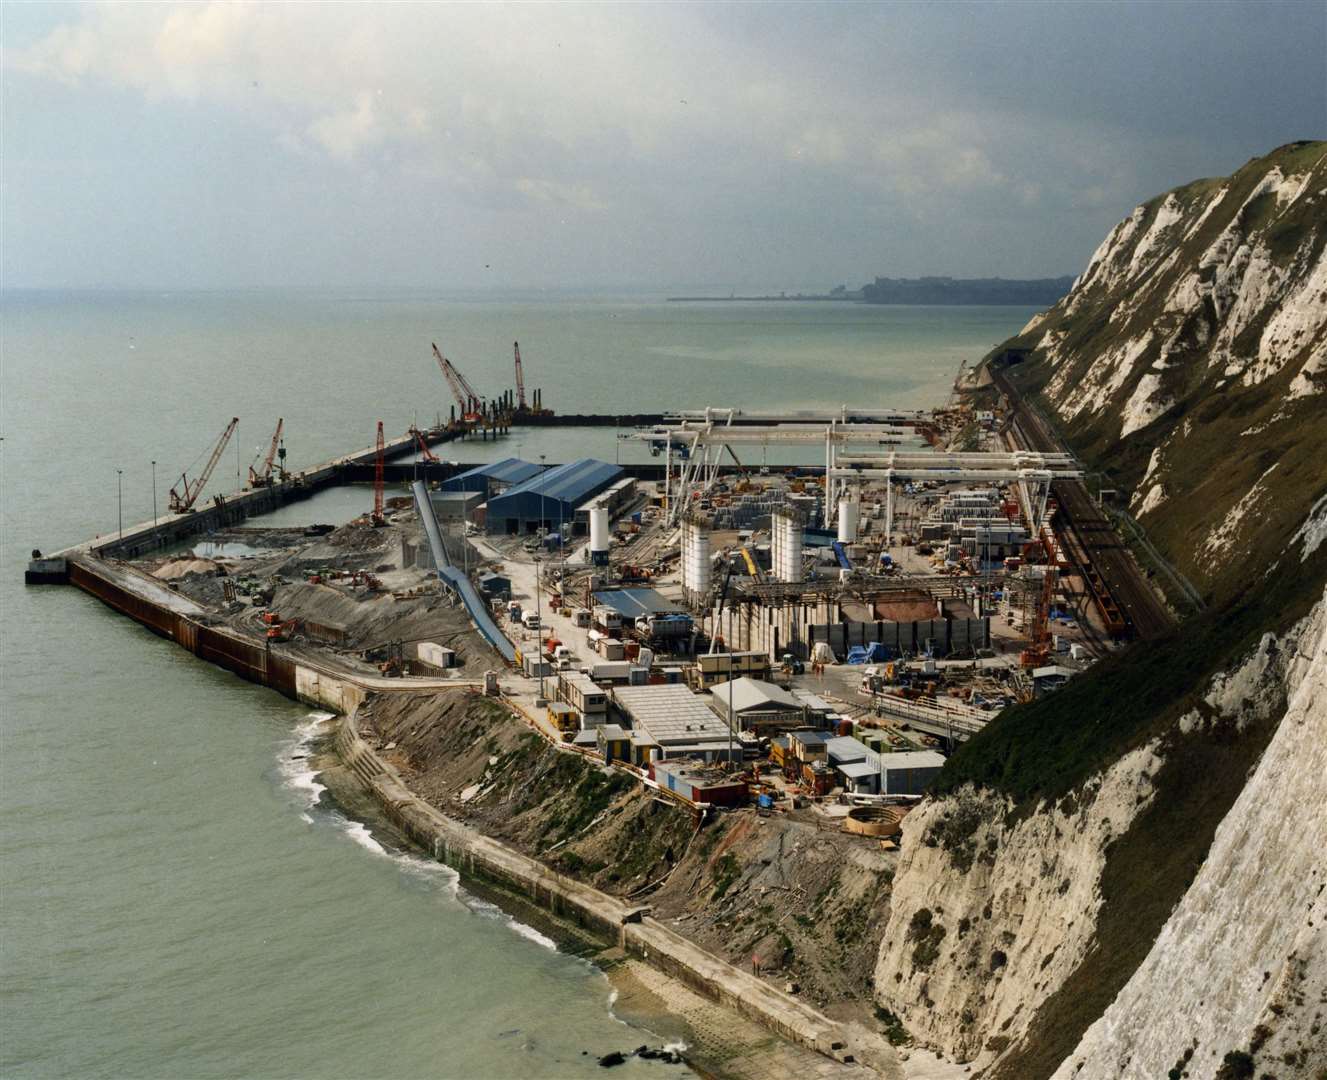 Samphire Hoe starting to take shape during the construction period